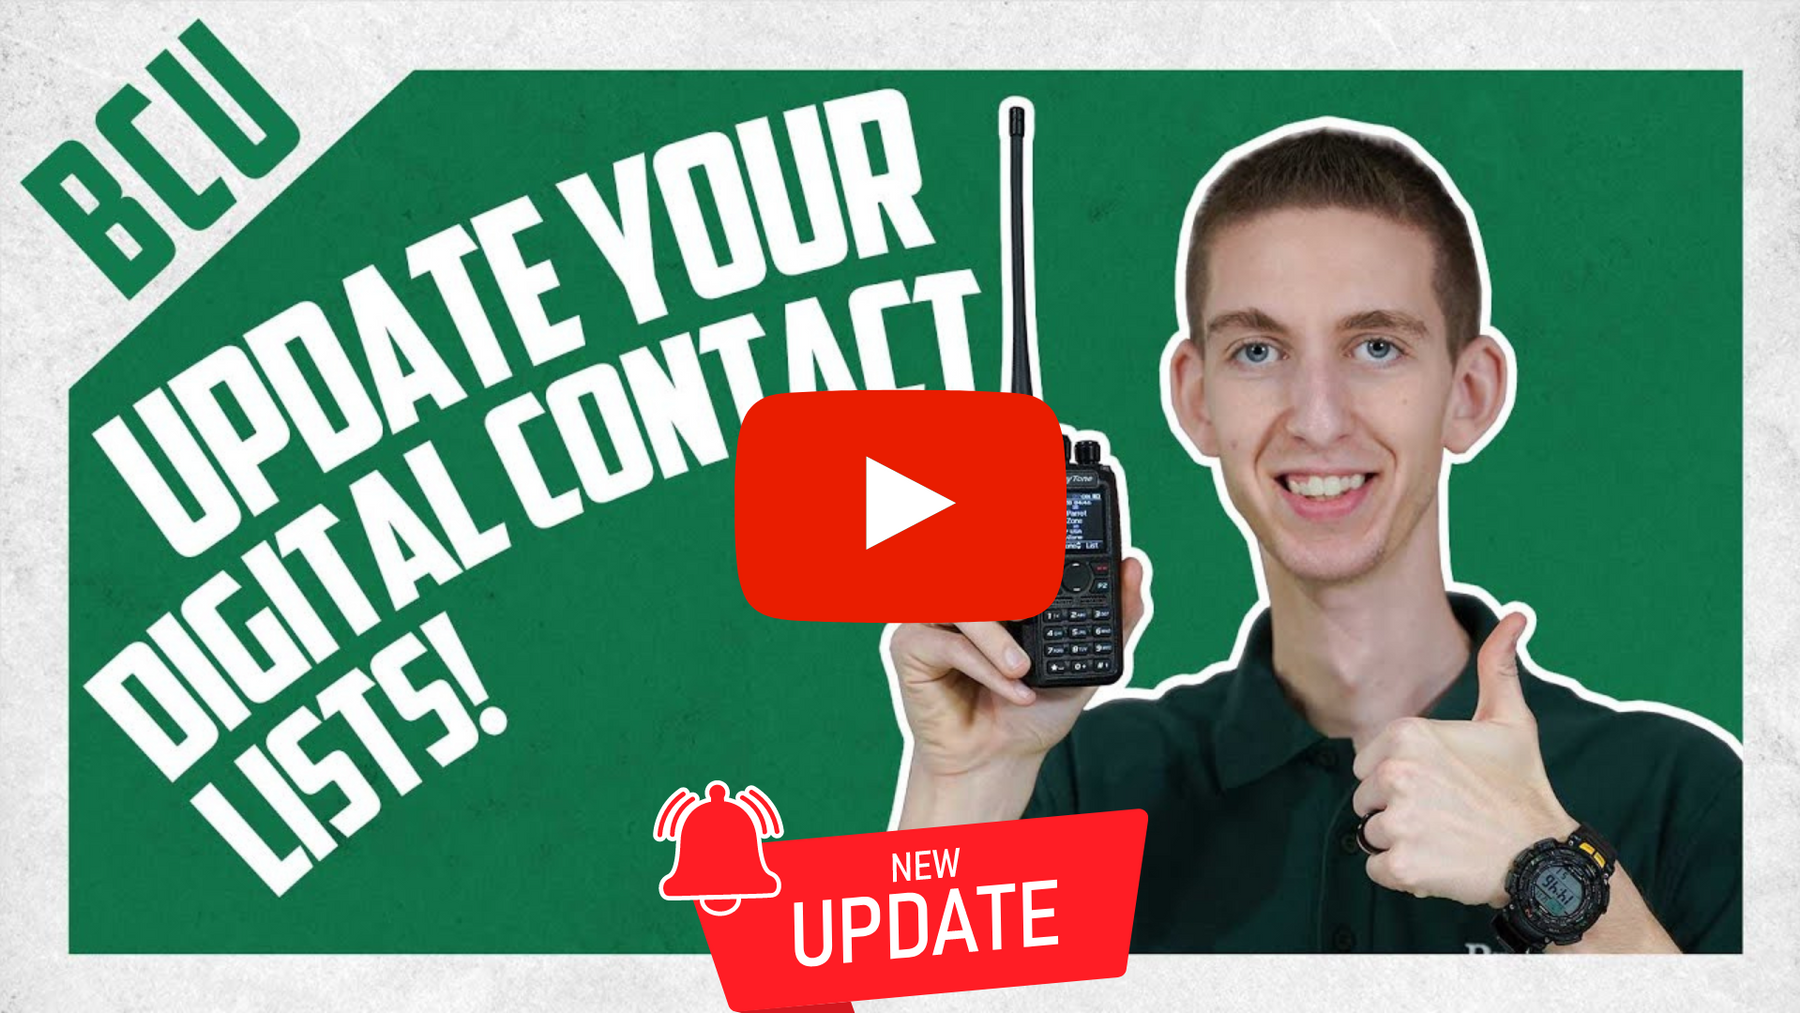 How to Update the Digital Contact List on Your Radio